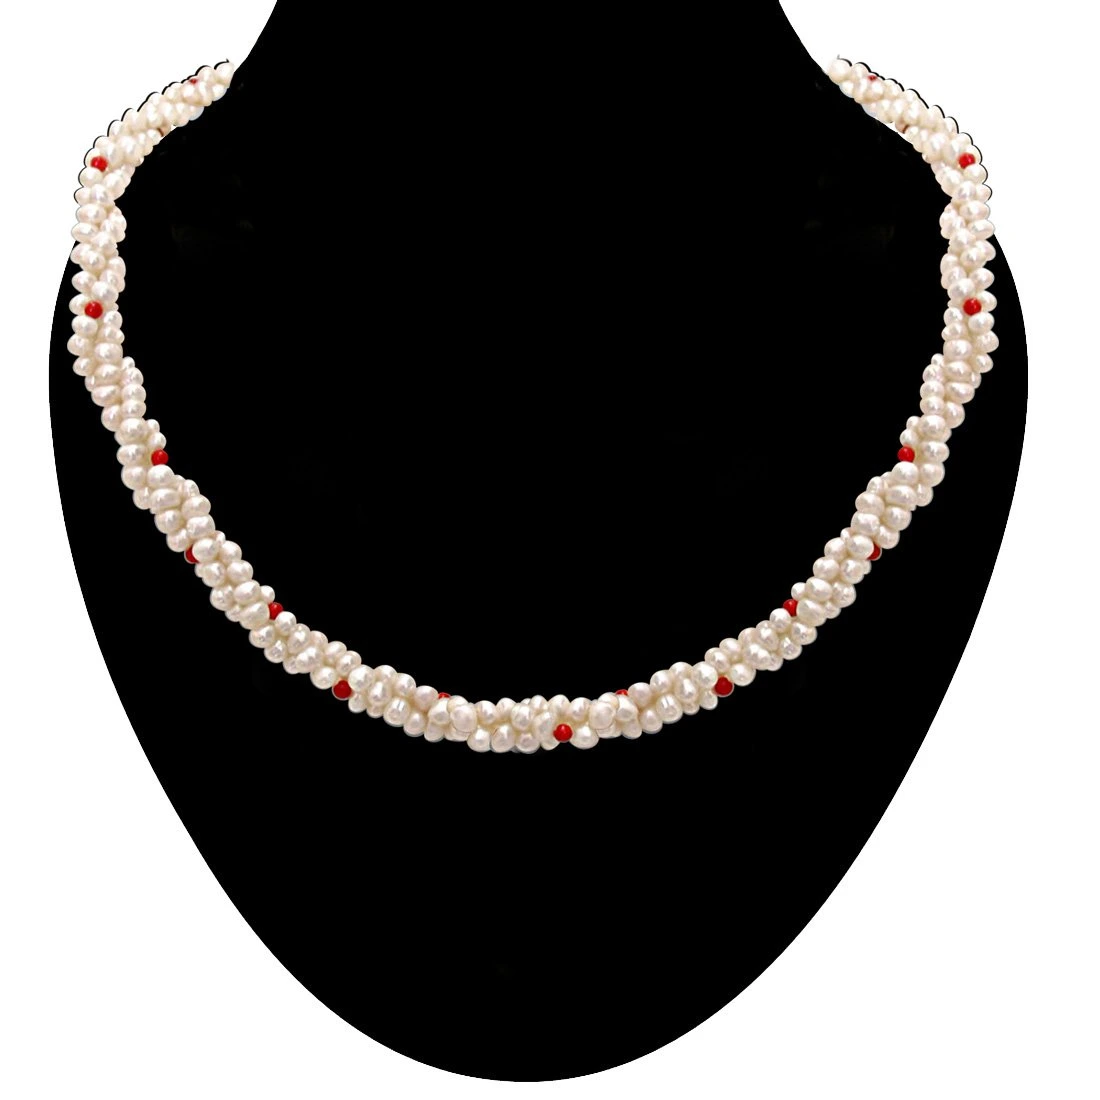 Coral Bead Beauty - 3 Line Twisted Real Pearl & Red Coral Beads Necklace for Women (SN303)